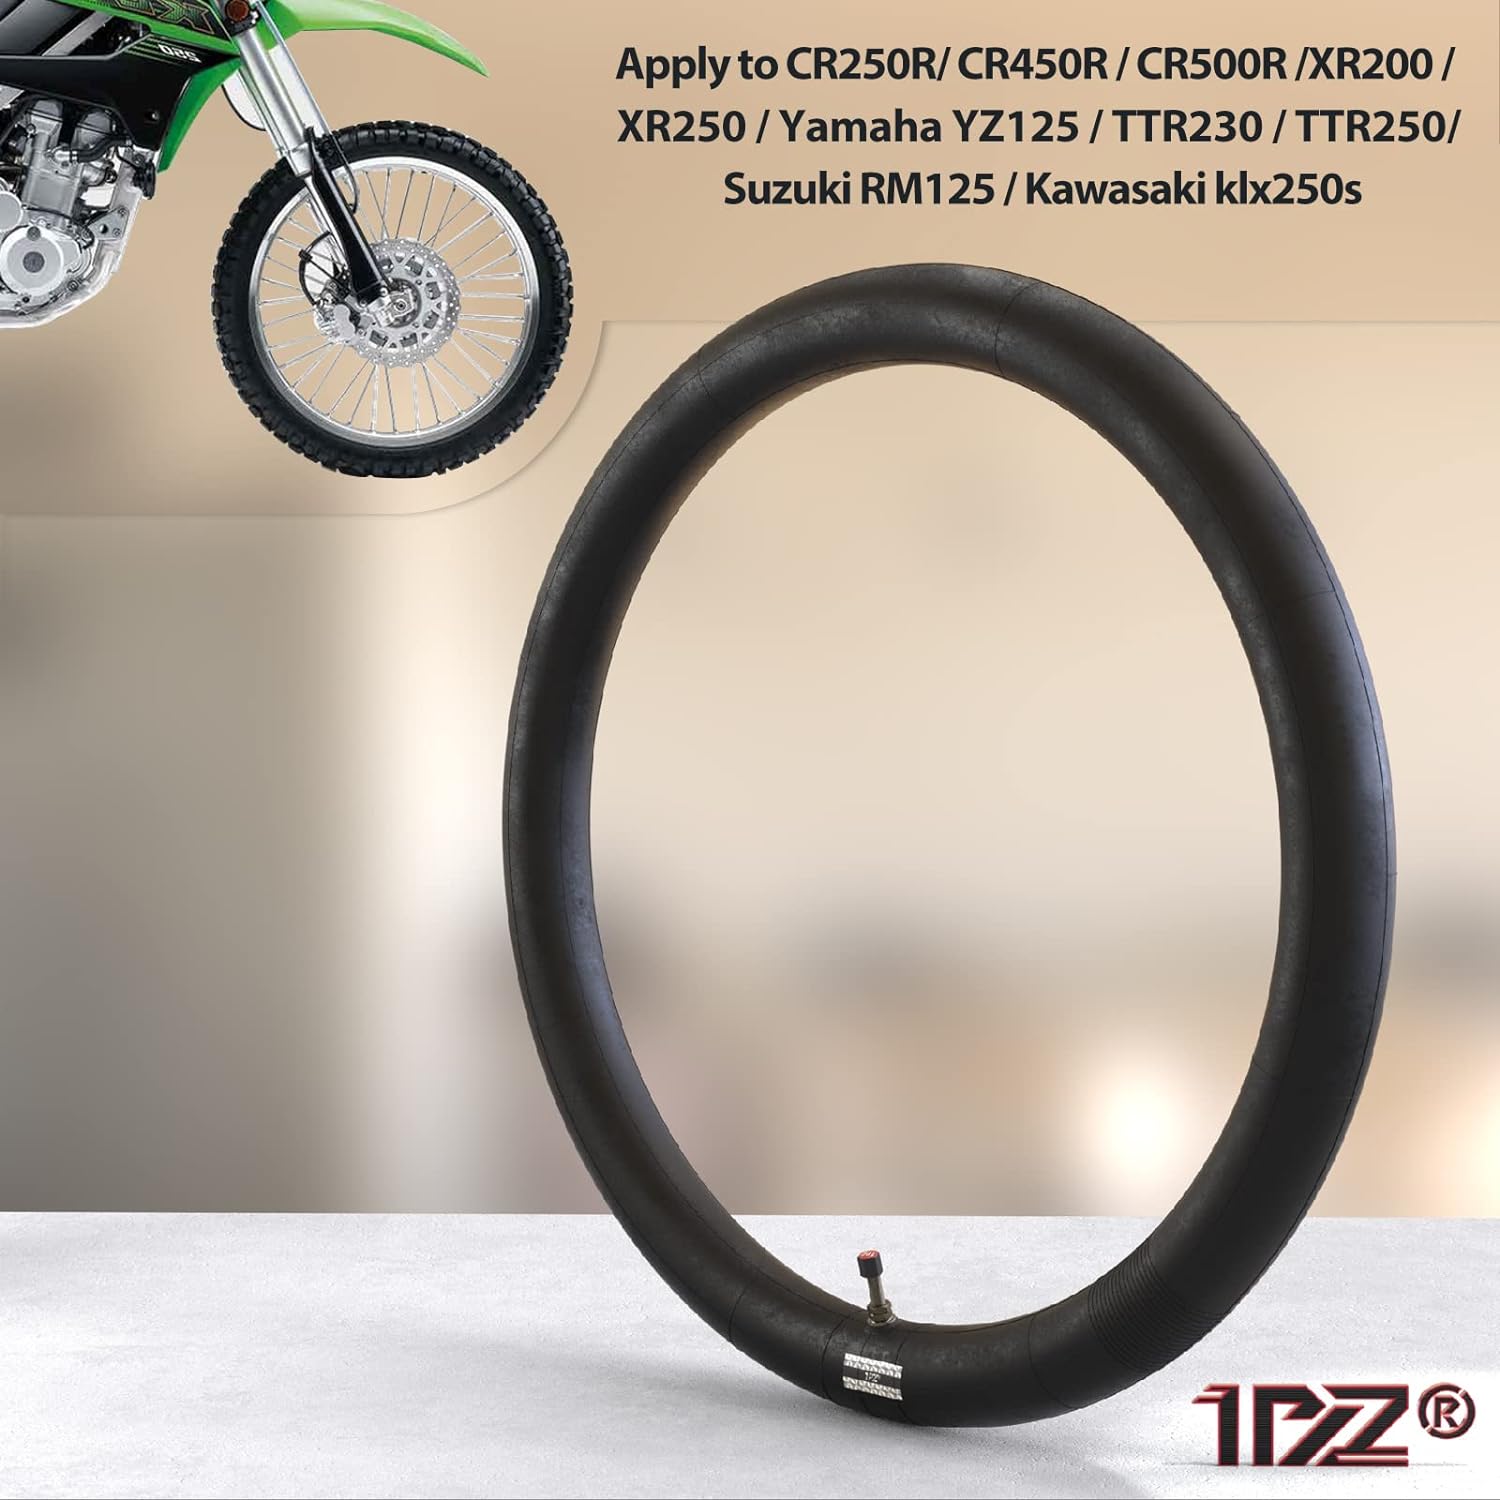 1PZ 80/100-21(300/325-21) TR6 Inner Tube Heavy Duty Schrader Valve Replacement with 21'' Motorcycle